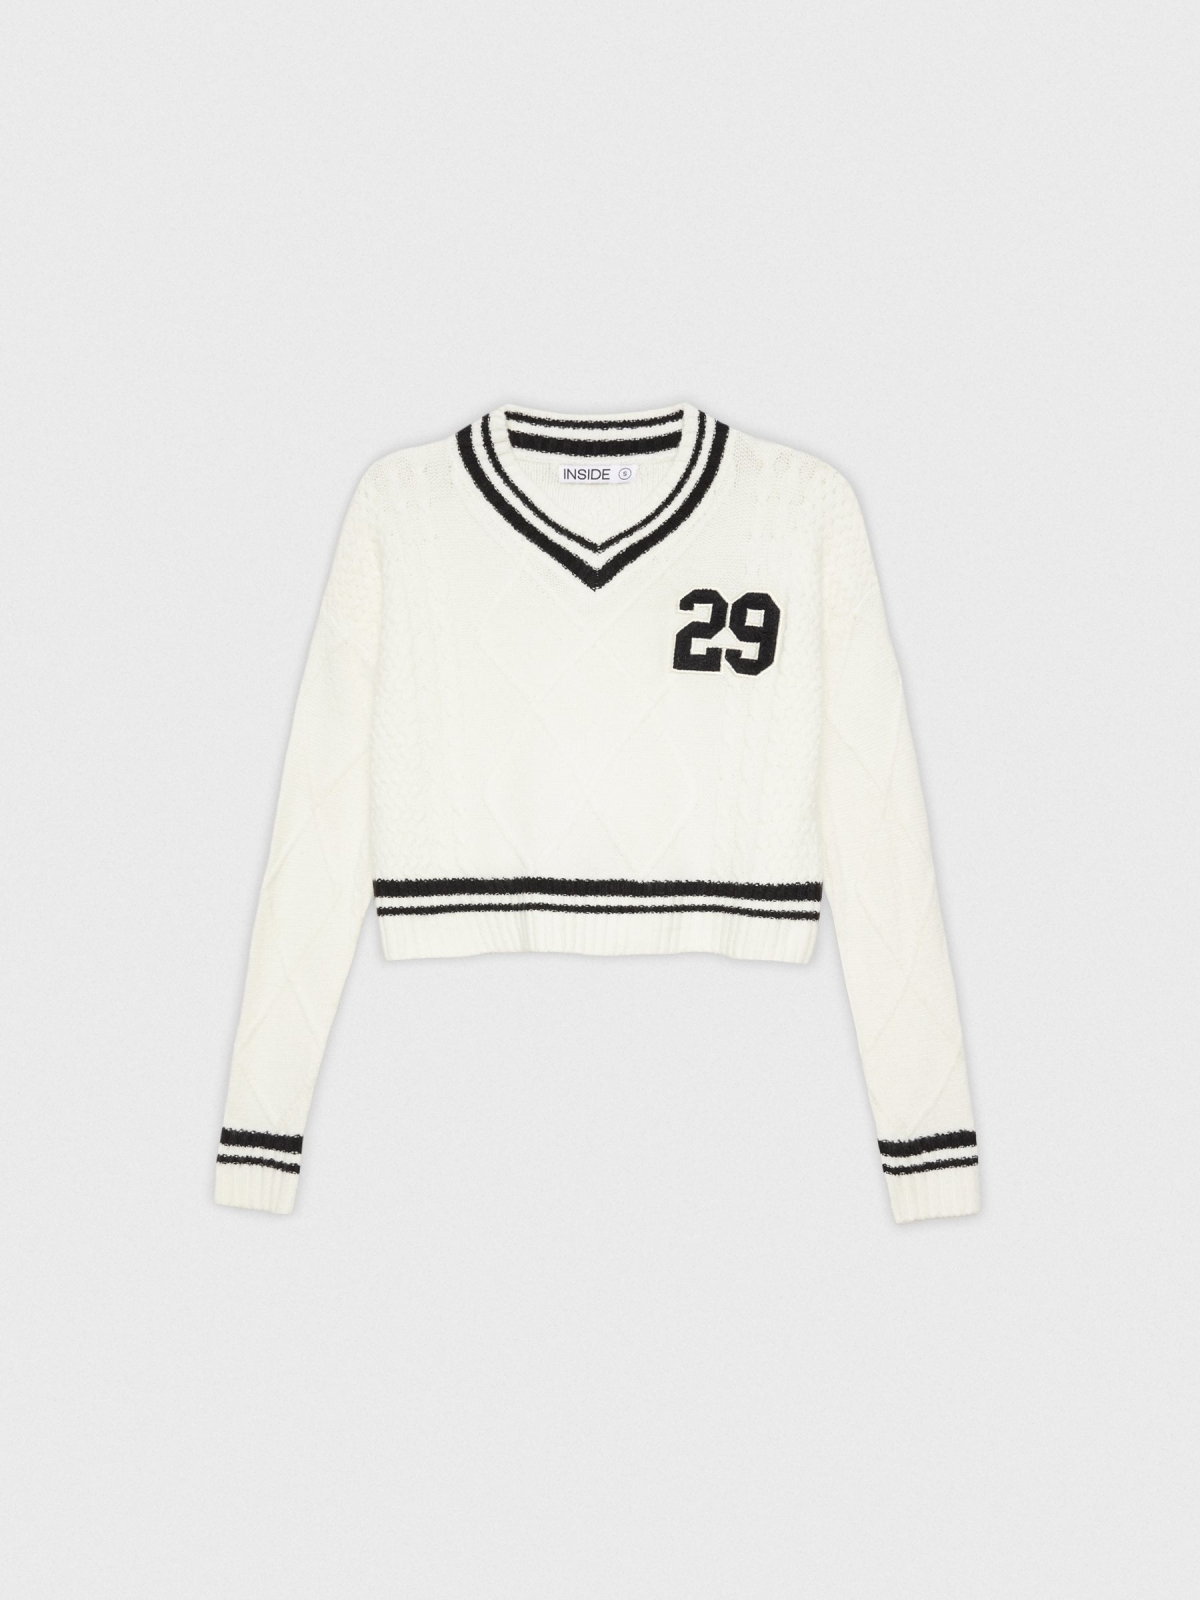  Jersey College 29 off white